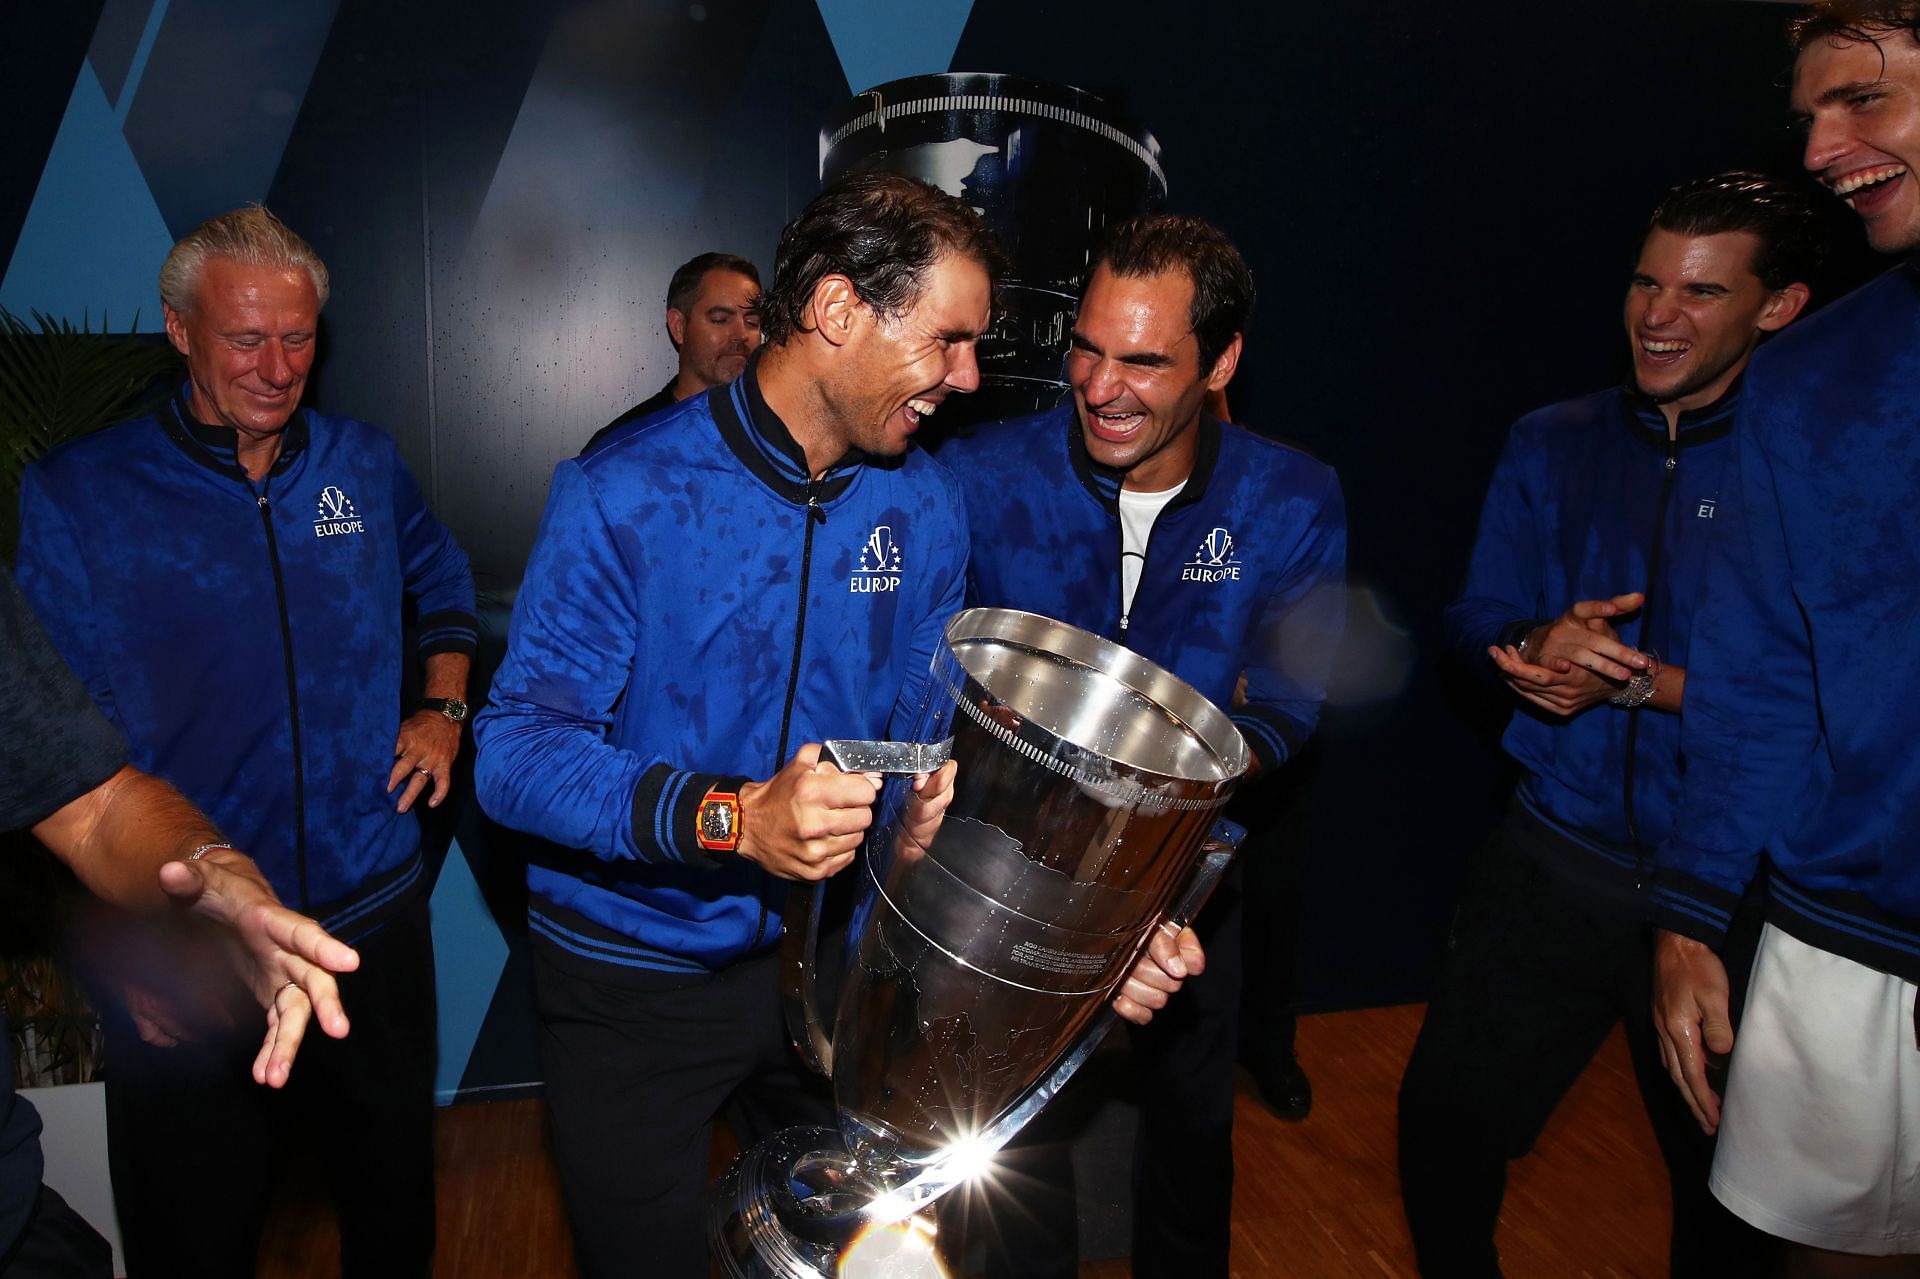 Rafael Nadal and Roger Federer during the 2019 Laver Cup